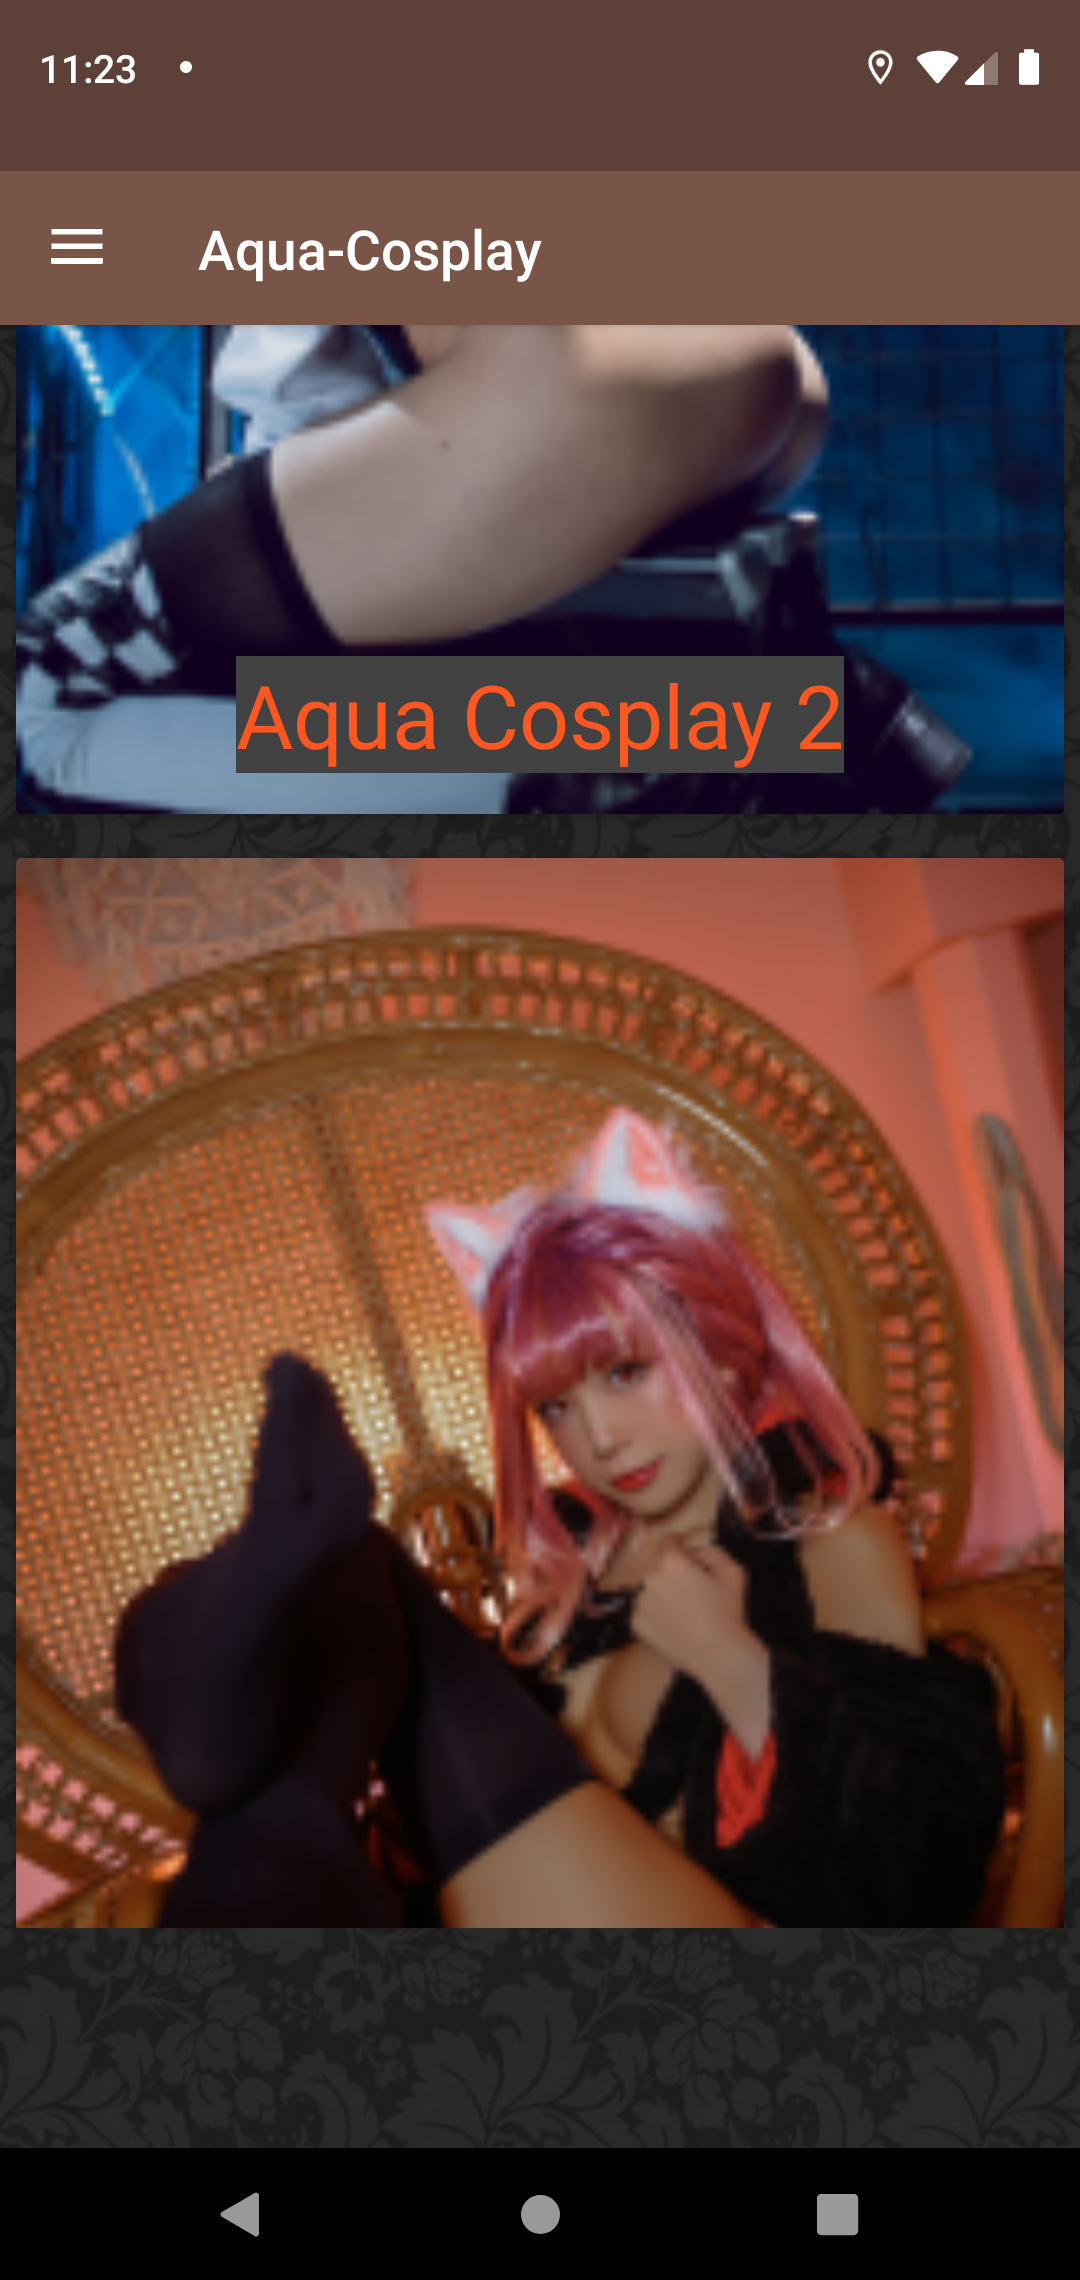 Aqua Cosplay collection,porn,pictures,backgrounds,futanari,app,hentia,apk,ster,daily,erotic,henti,galleries,hentai,photos,cosplay,photo,mobile,pic,xxx,apps,gallery